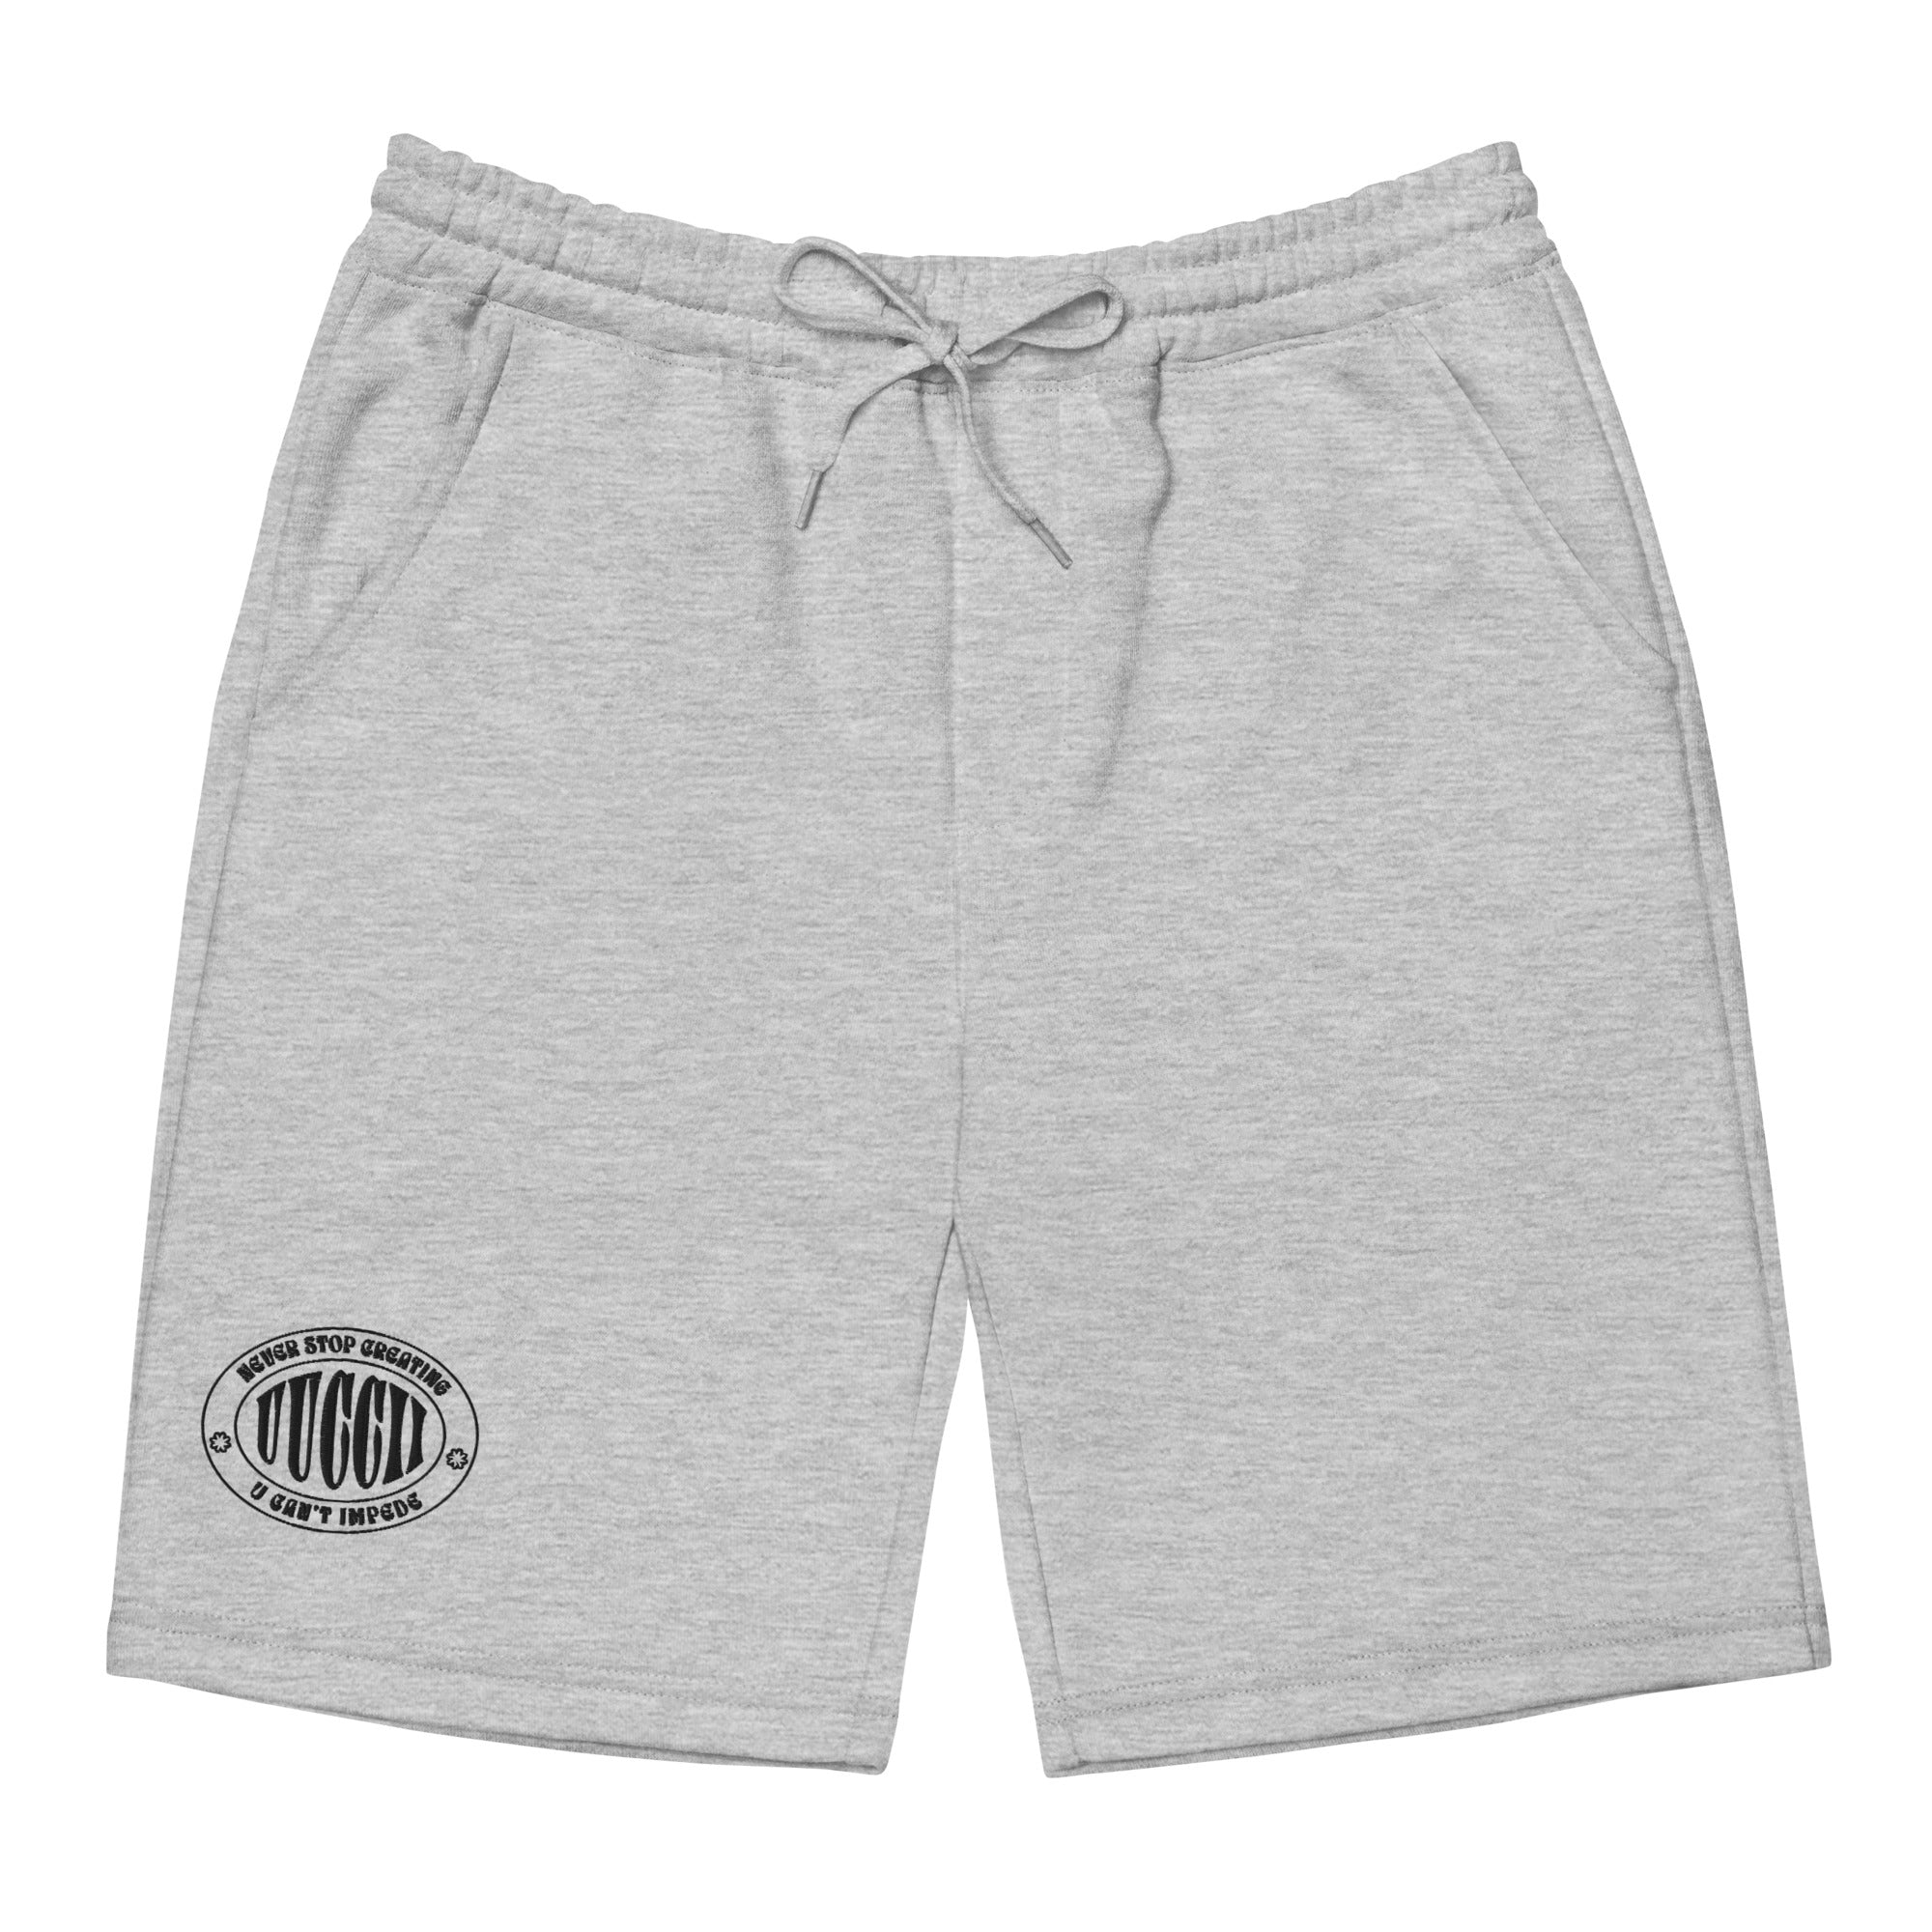 Never Stop Creating Embroidered Men's fleece shorts